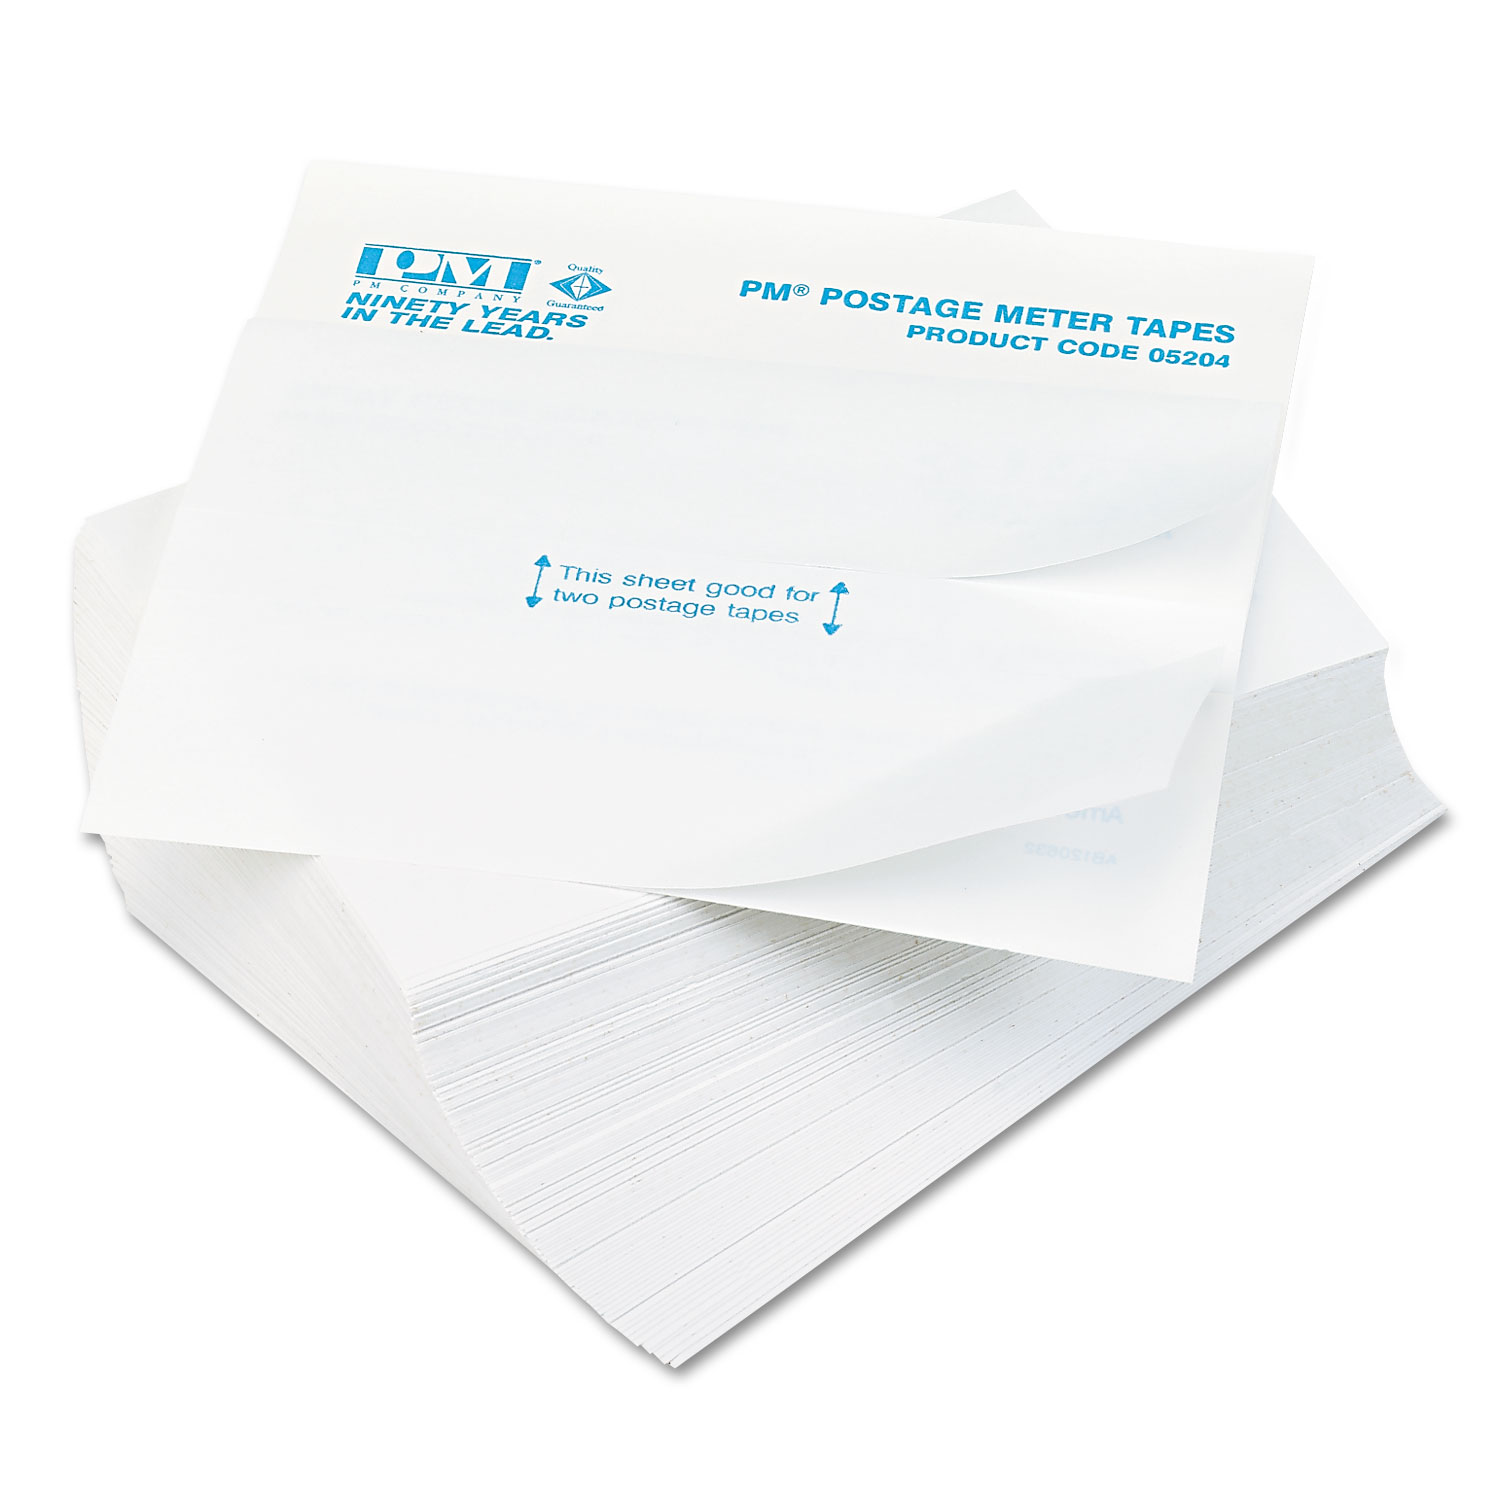 Postage Meter Double Tape Sheets, 4 x 5-1/2, 300/Pack